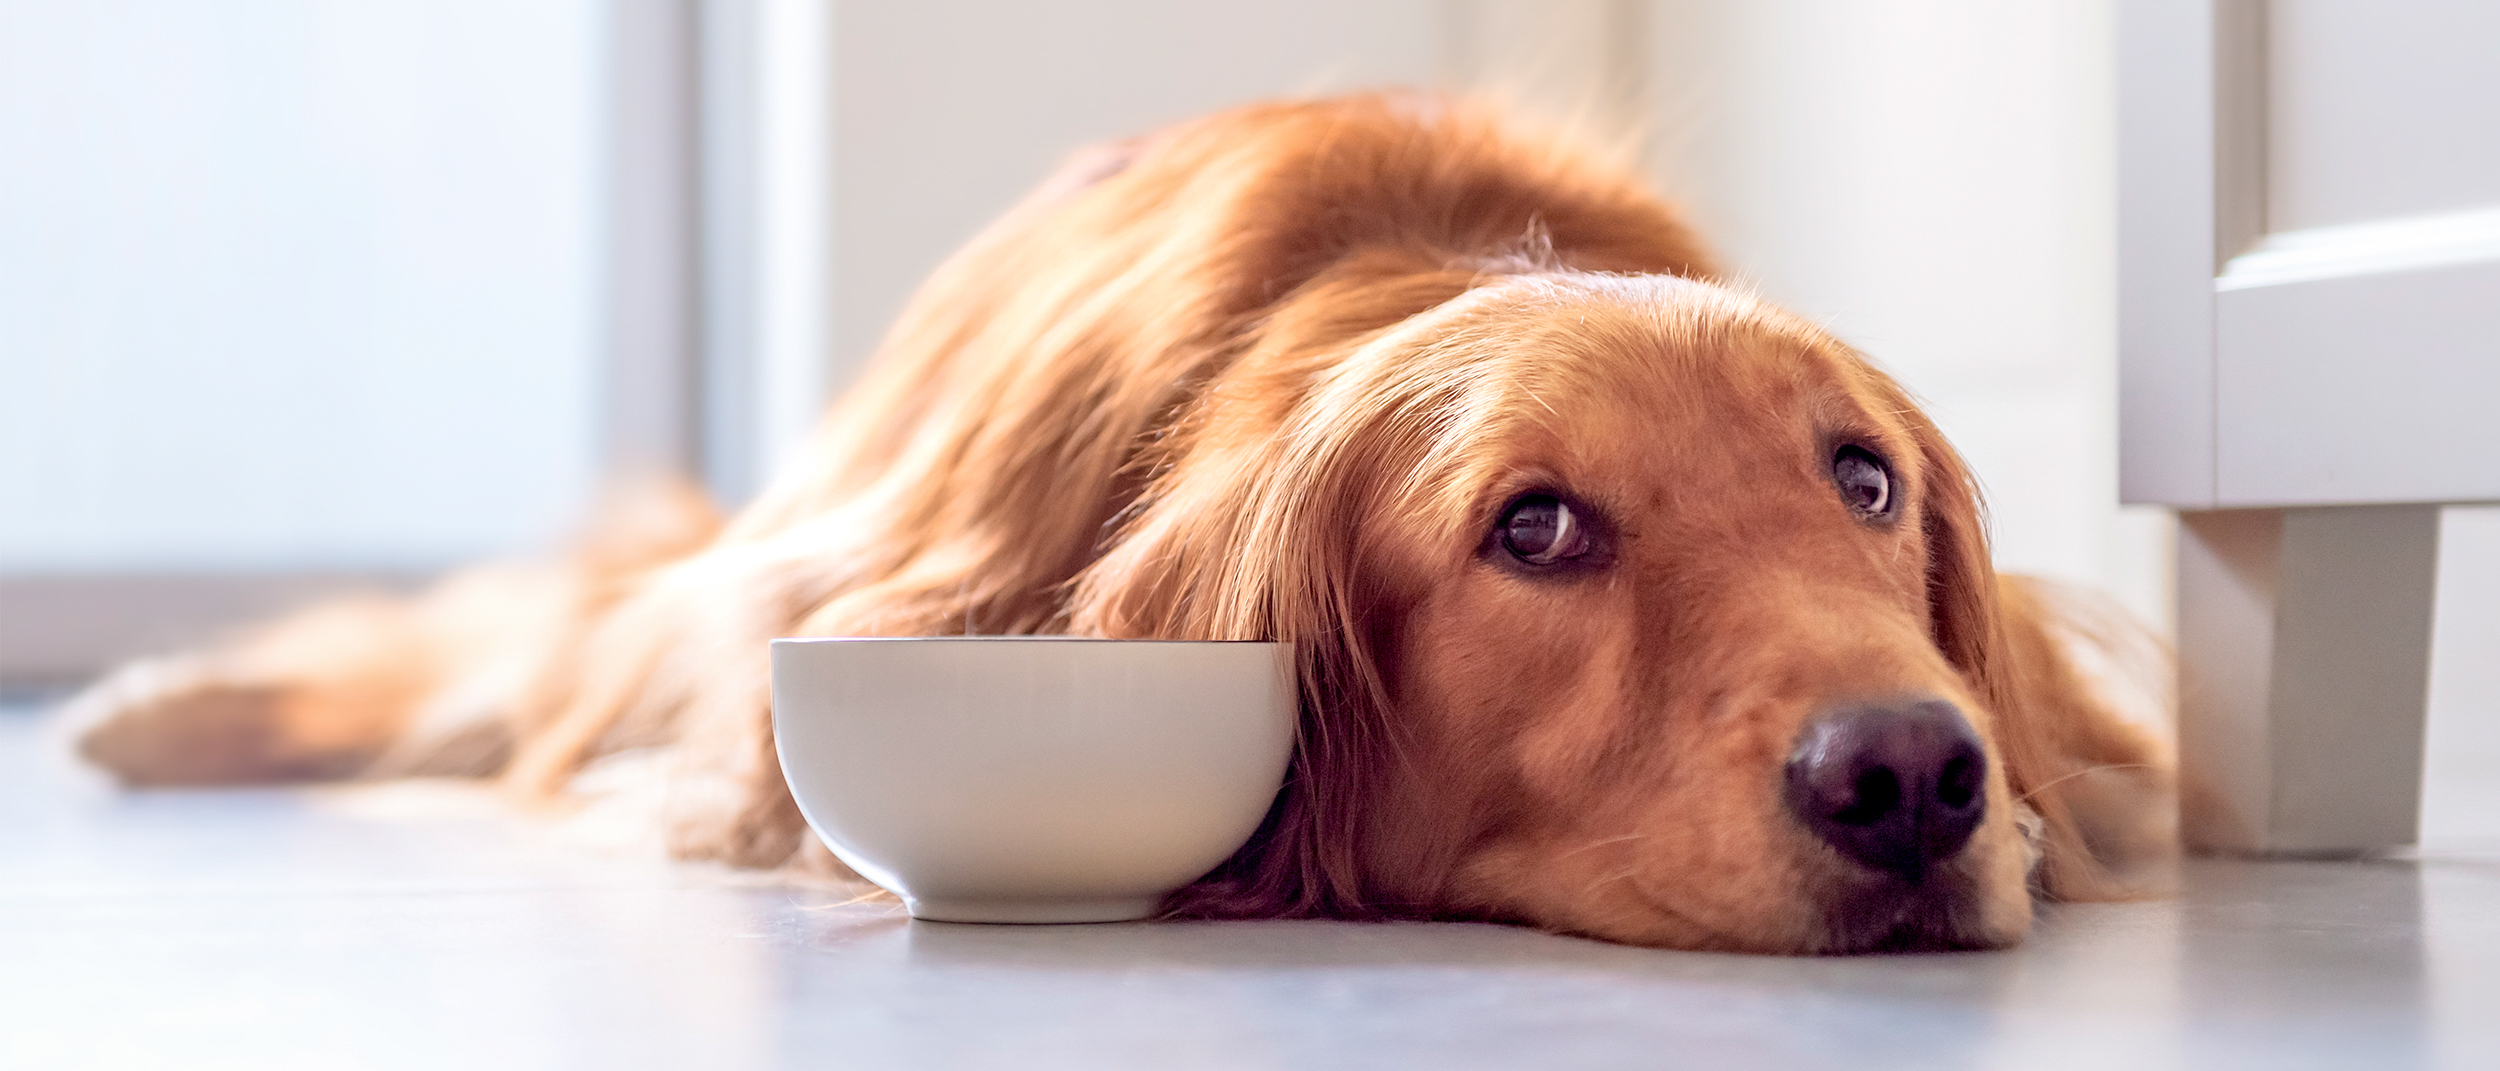 Adult Golden Retriever lying down in a kitchen next to a bowl.